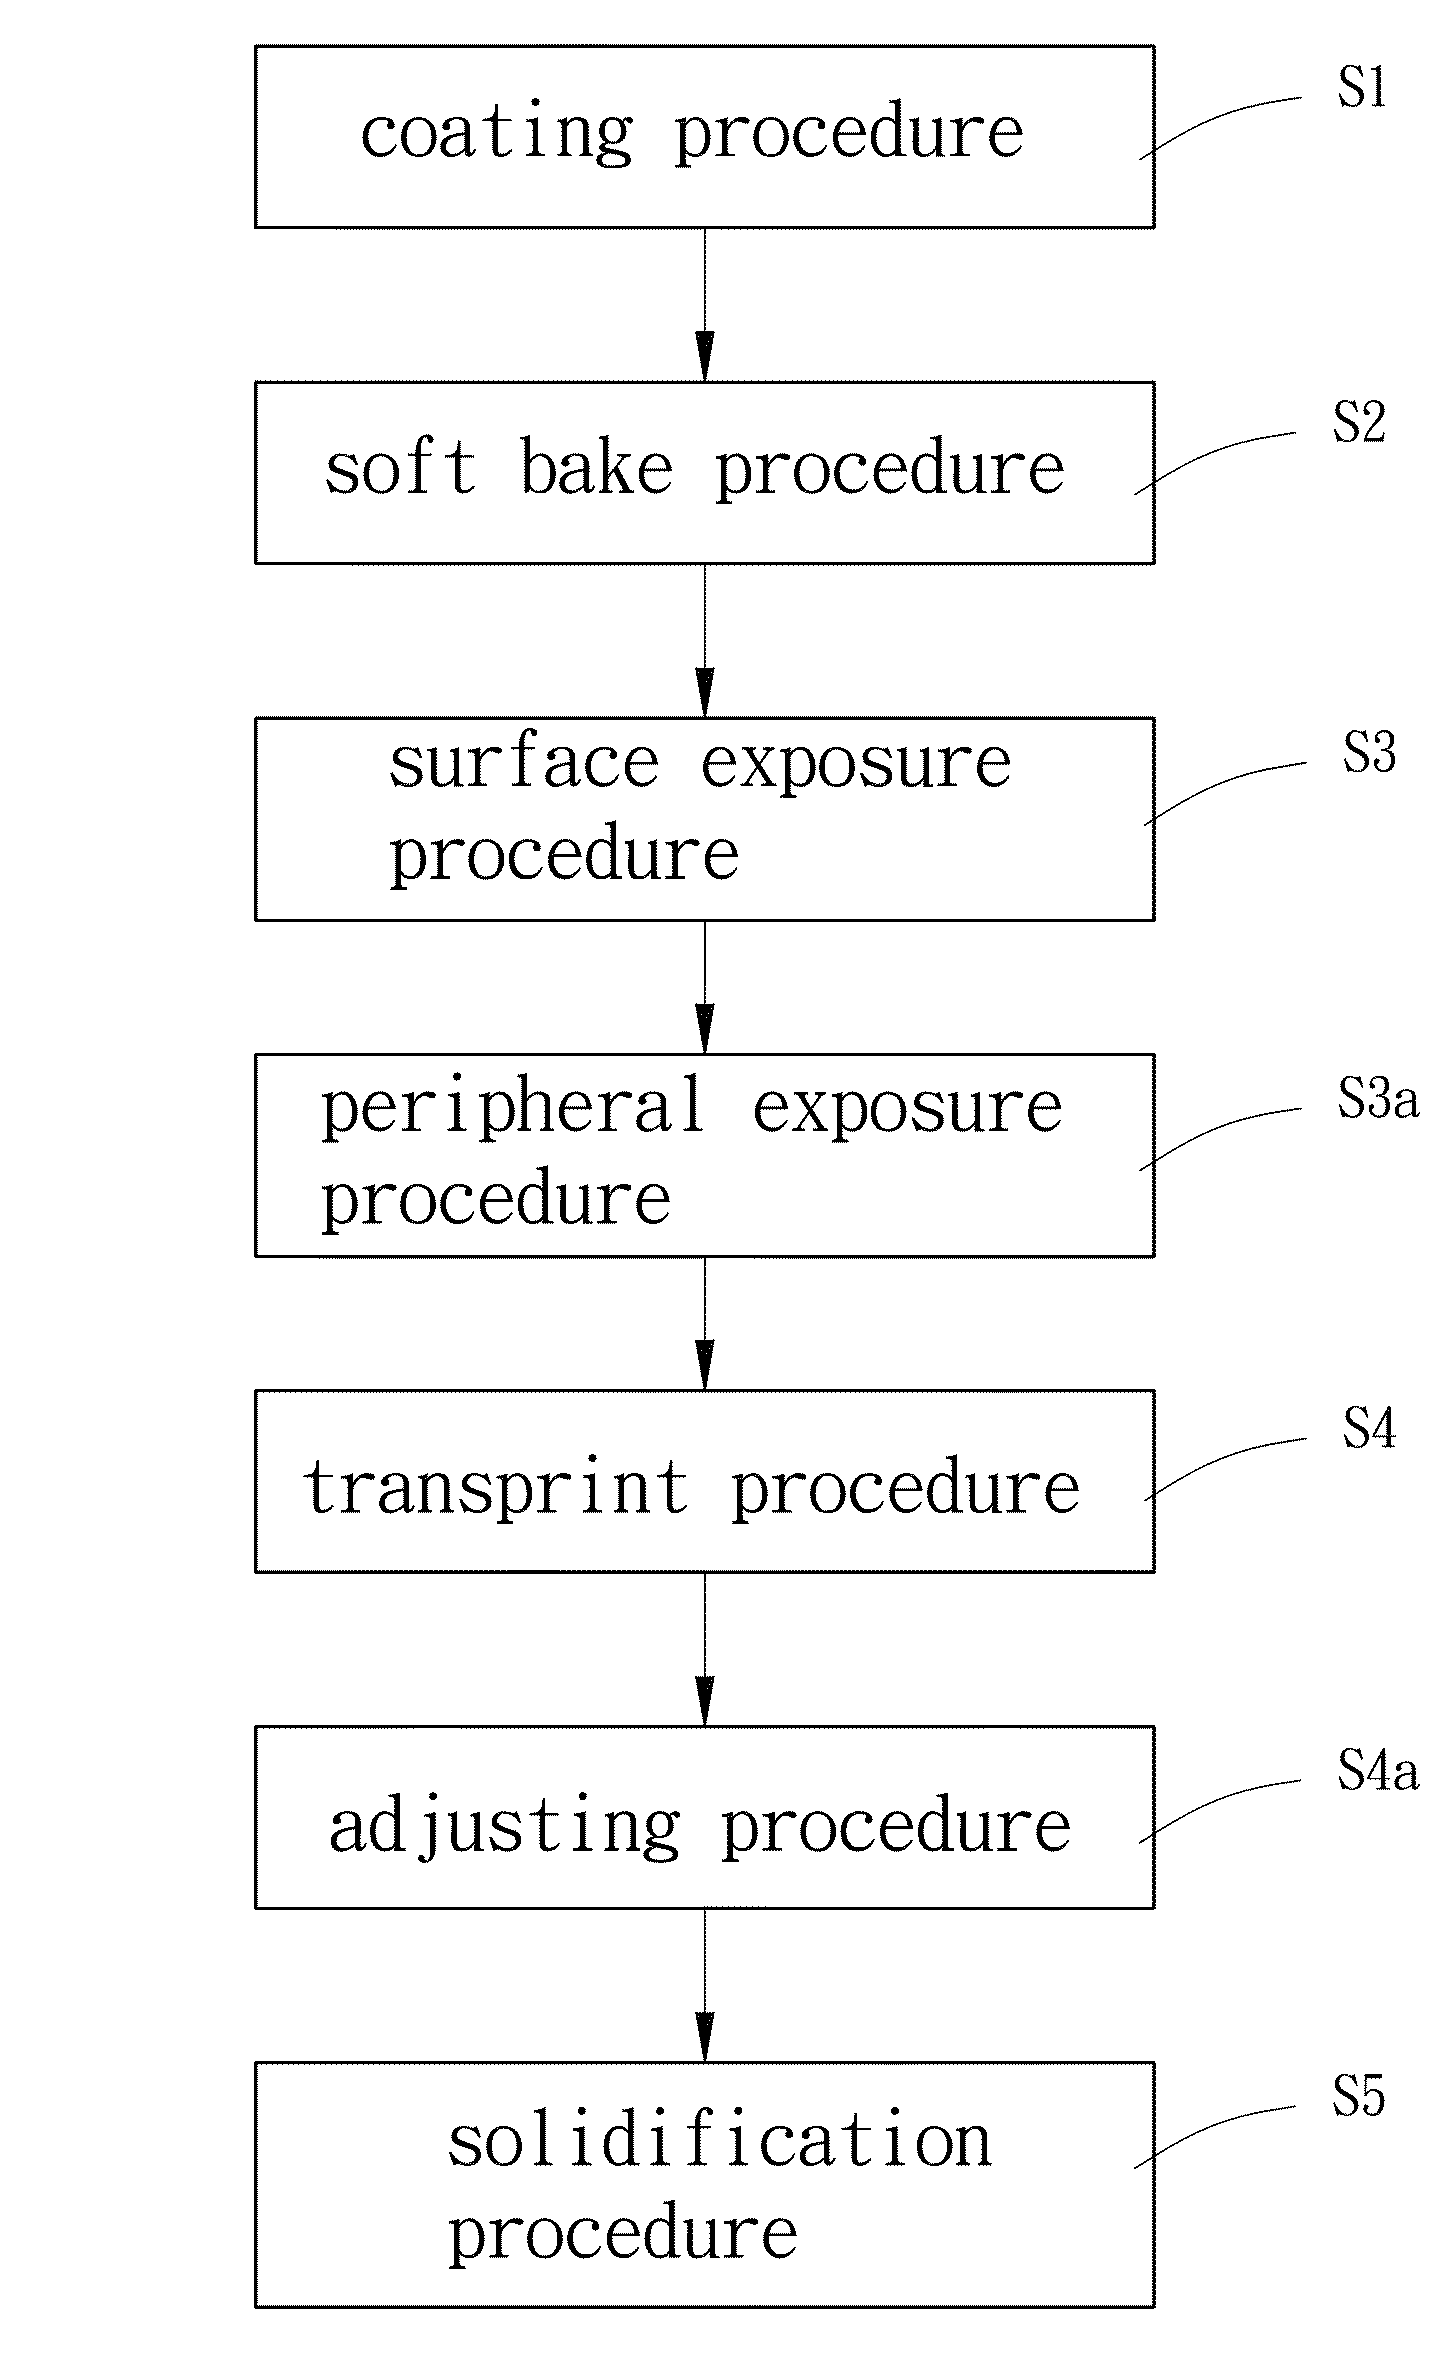 Method of manufacturing microlens